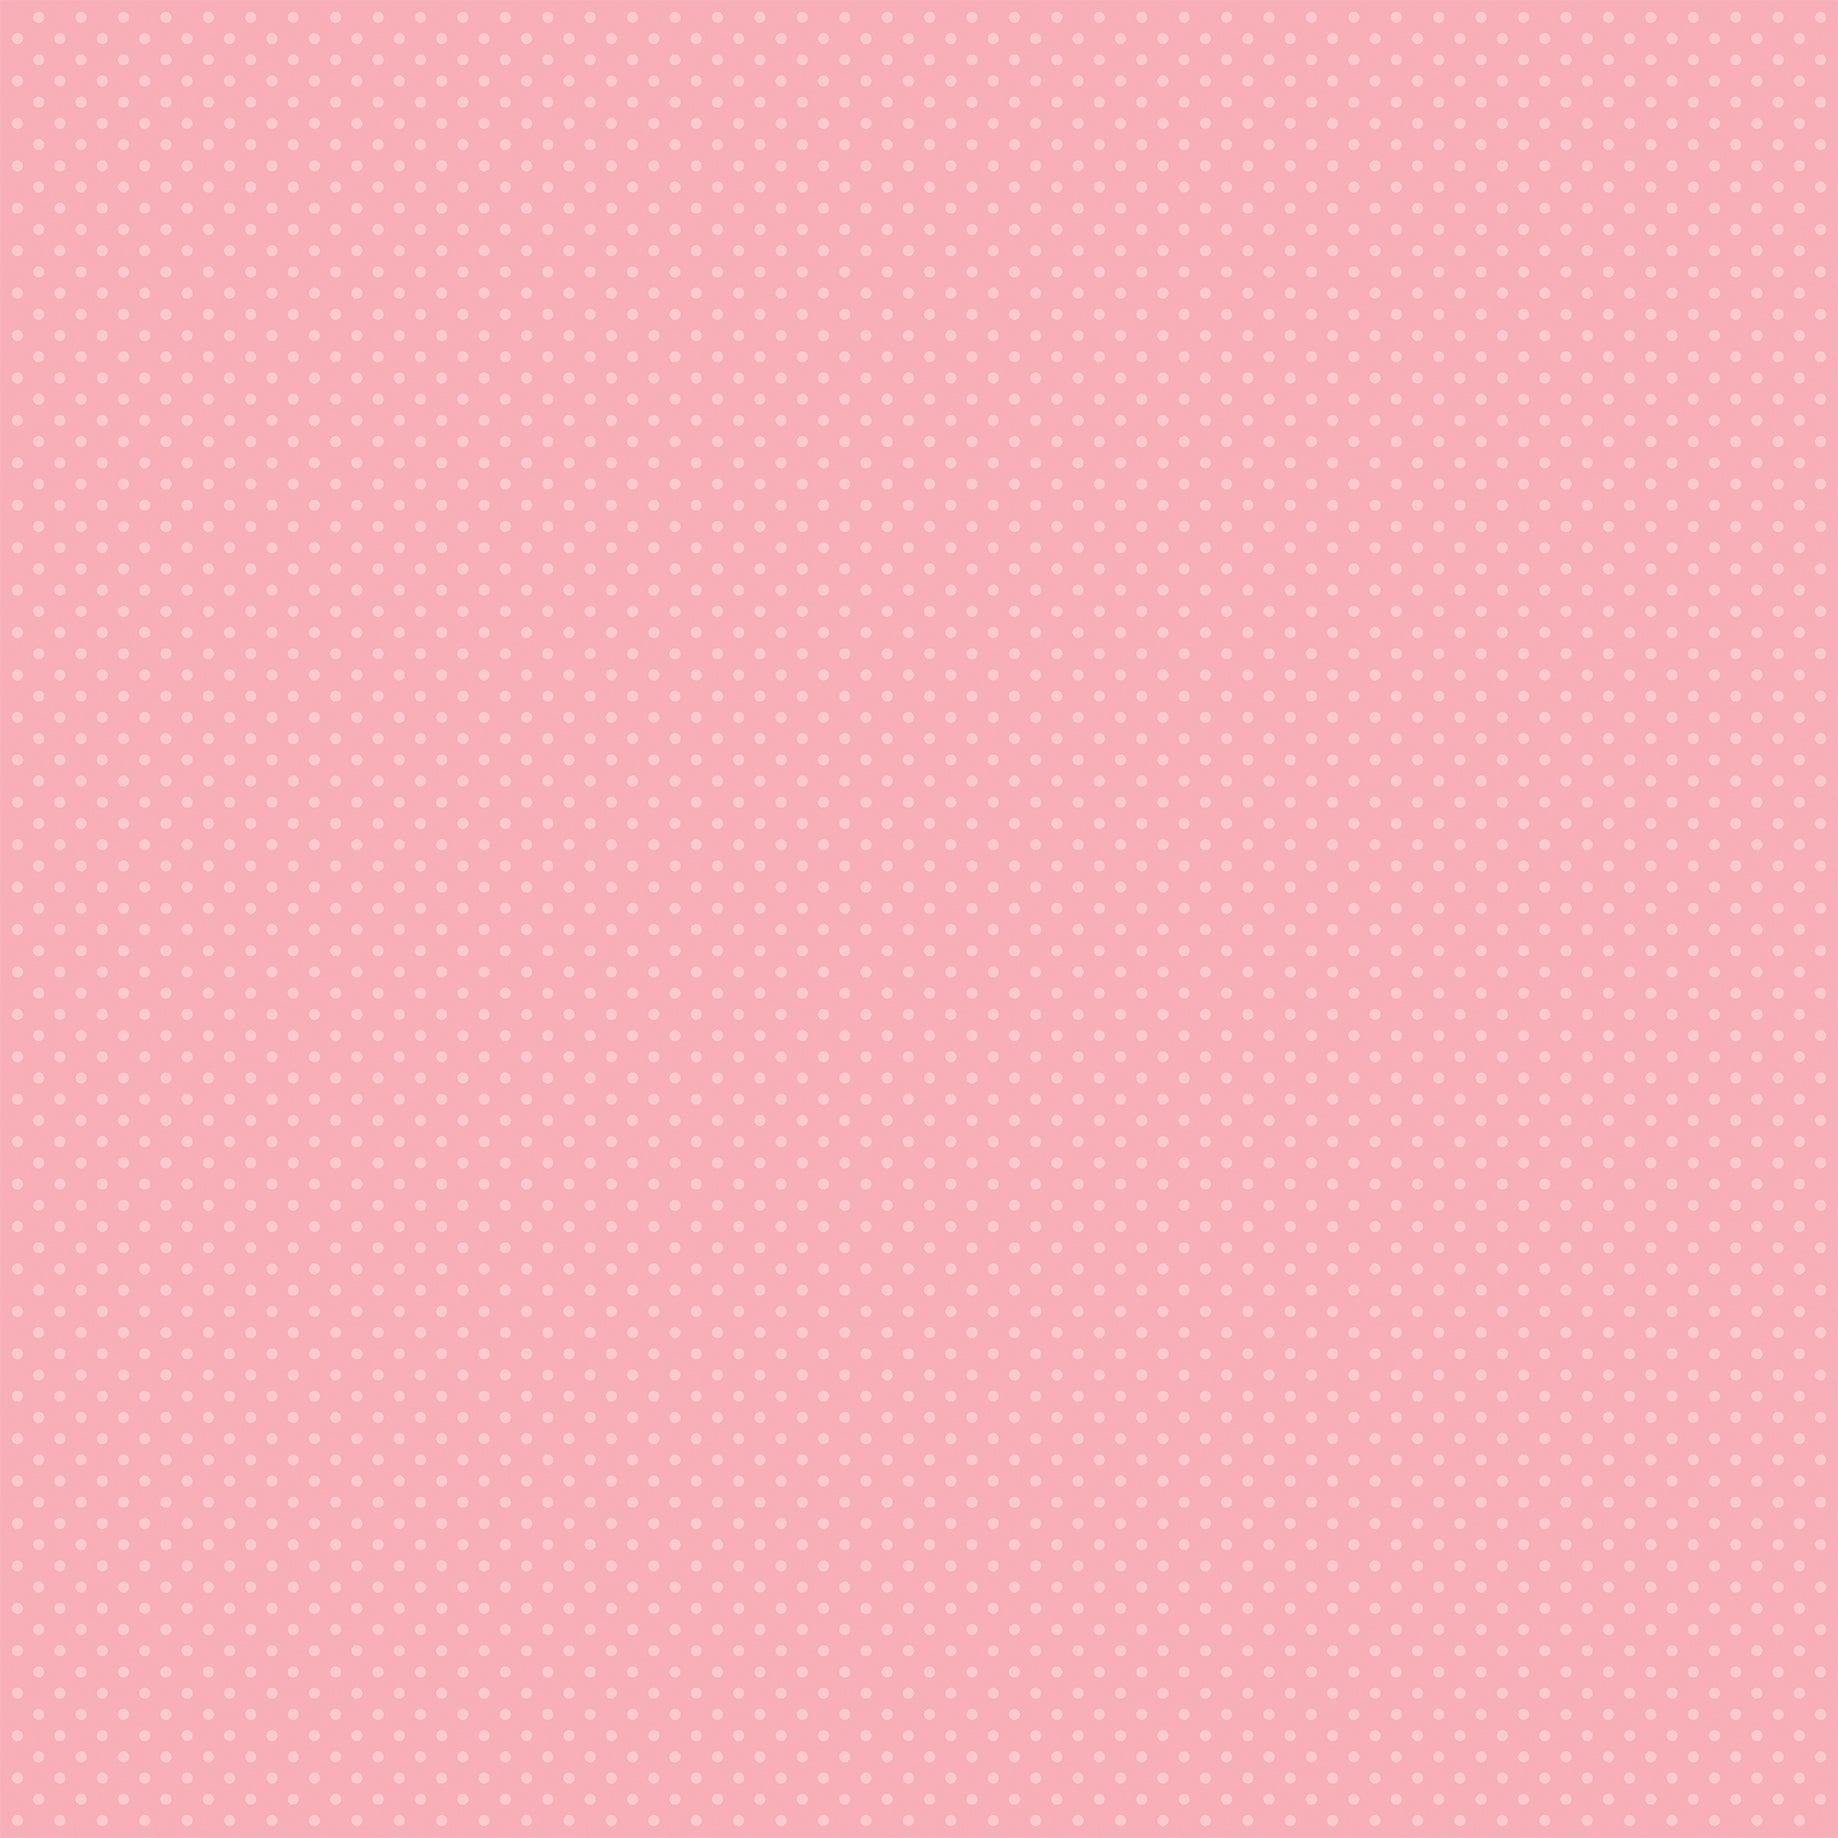 Carta Bella Dots Double-Sided Cardstock 12x12 Pink